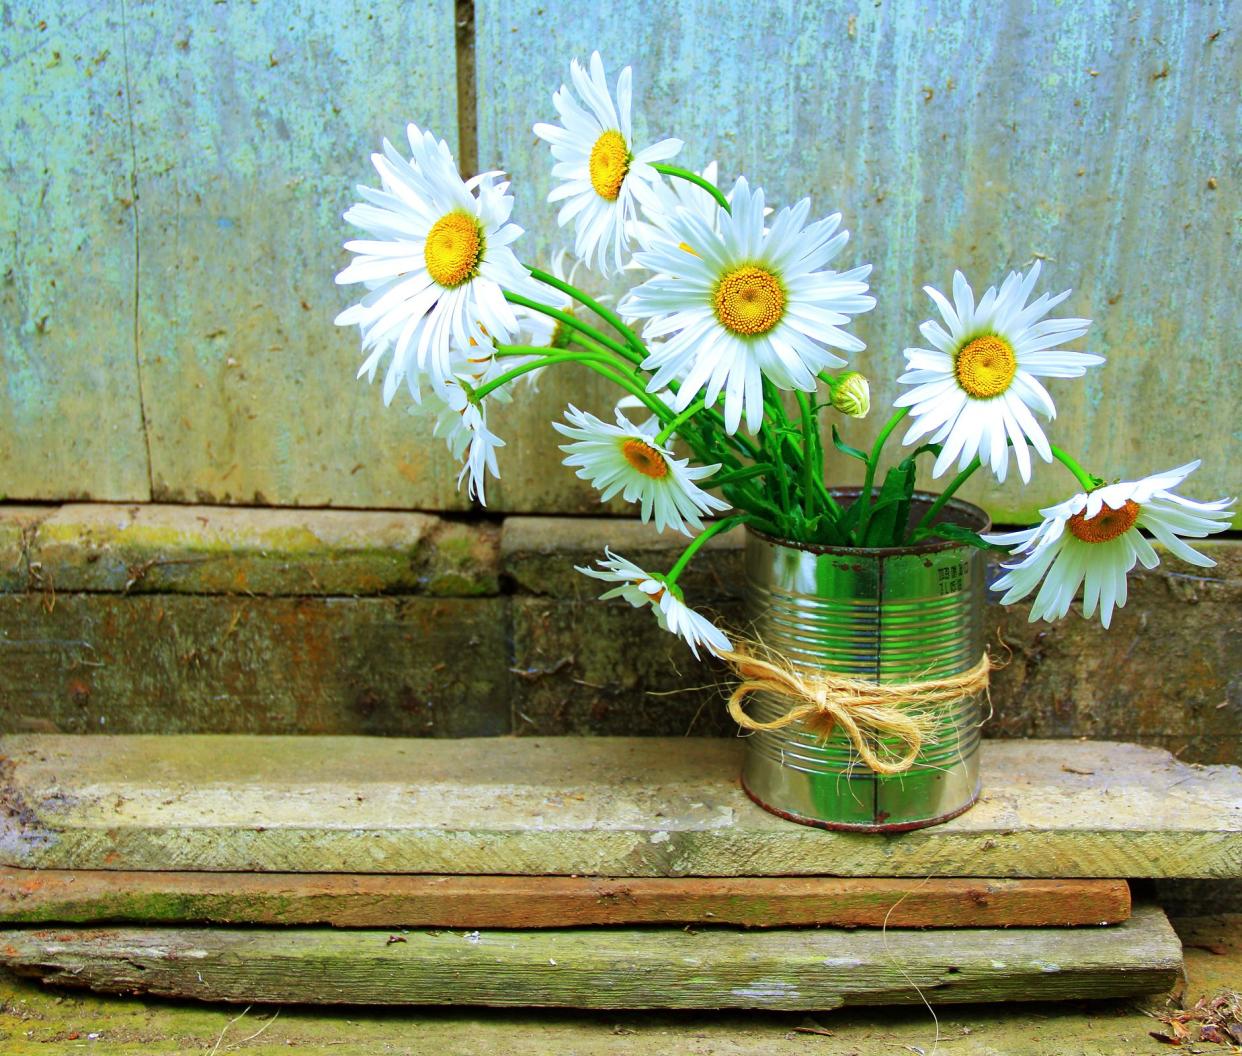 Closeup of several daisies in a recycled can as a vase on the stairs in front of a closed door of an old stable, rustic look